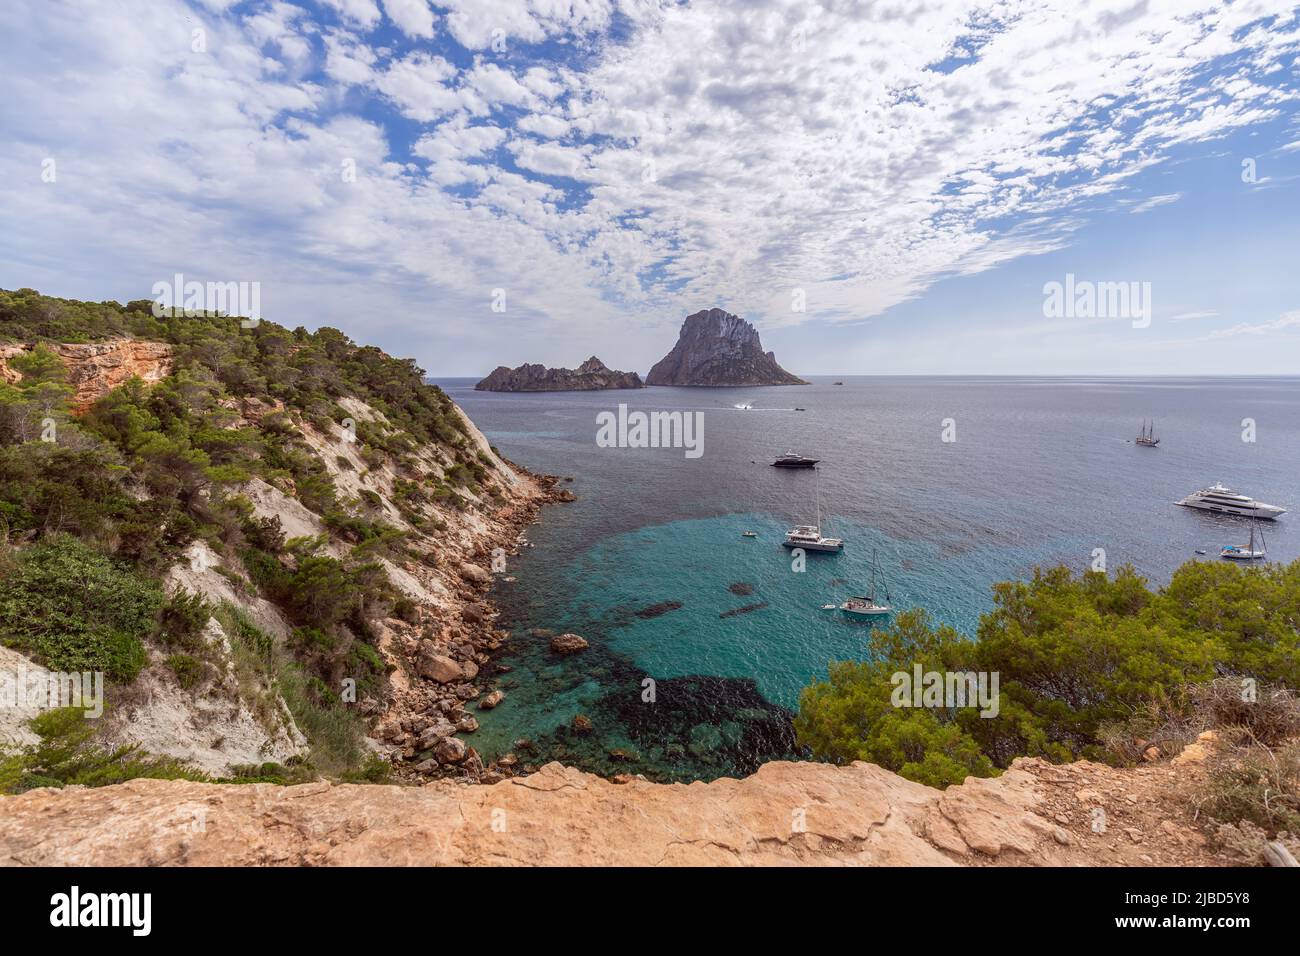 Super panoramic view Es Vedra rock on horizon and piercing blue summer sky full of ragged small white clouds, Ibiza, Balearic Islands, Spain Stock Photo